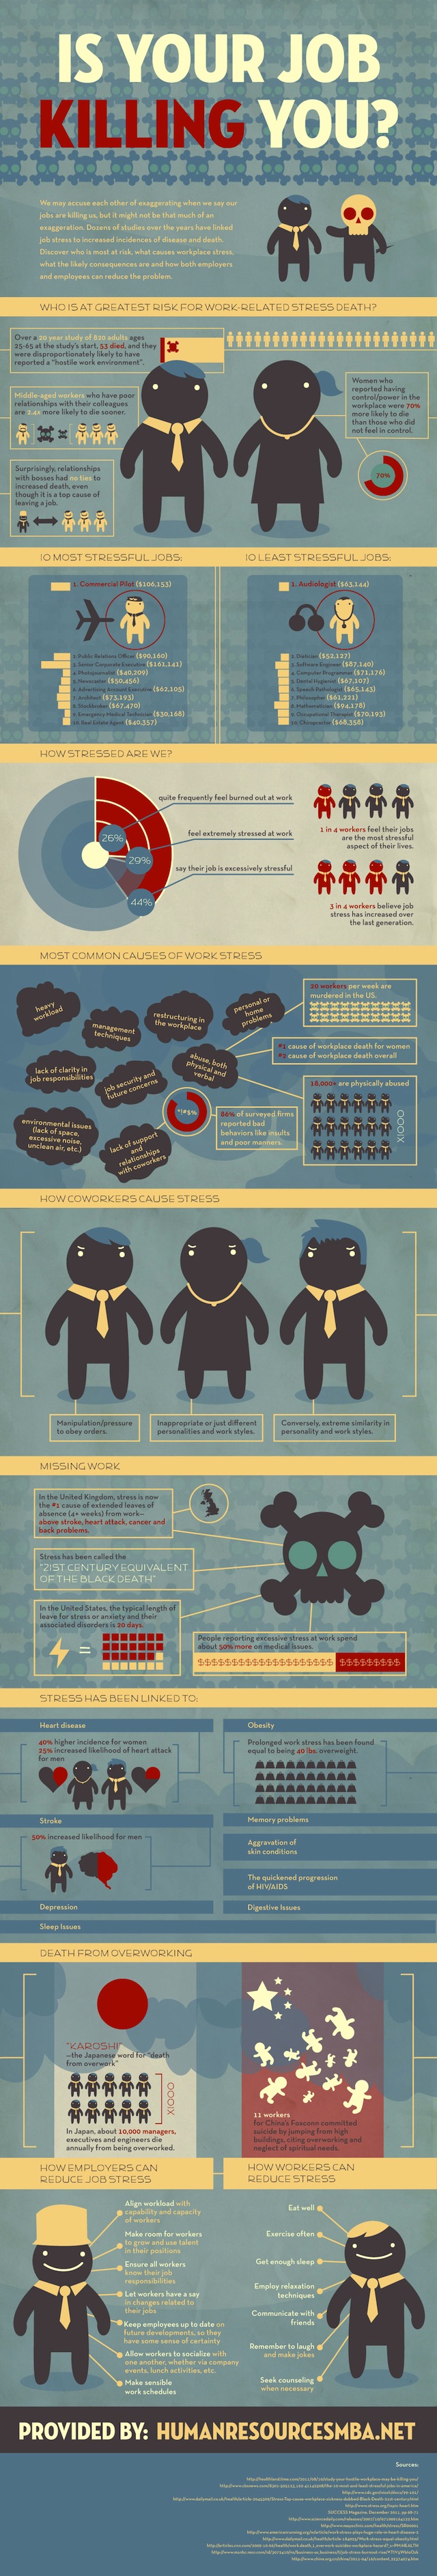 INFOGRAPHIC - Is Your Job Killing You?